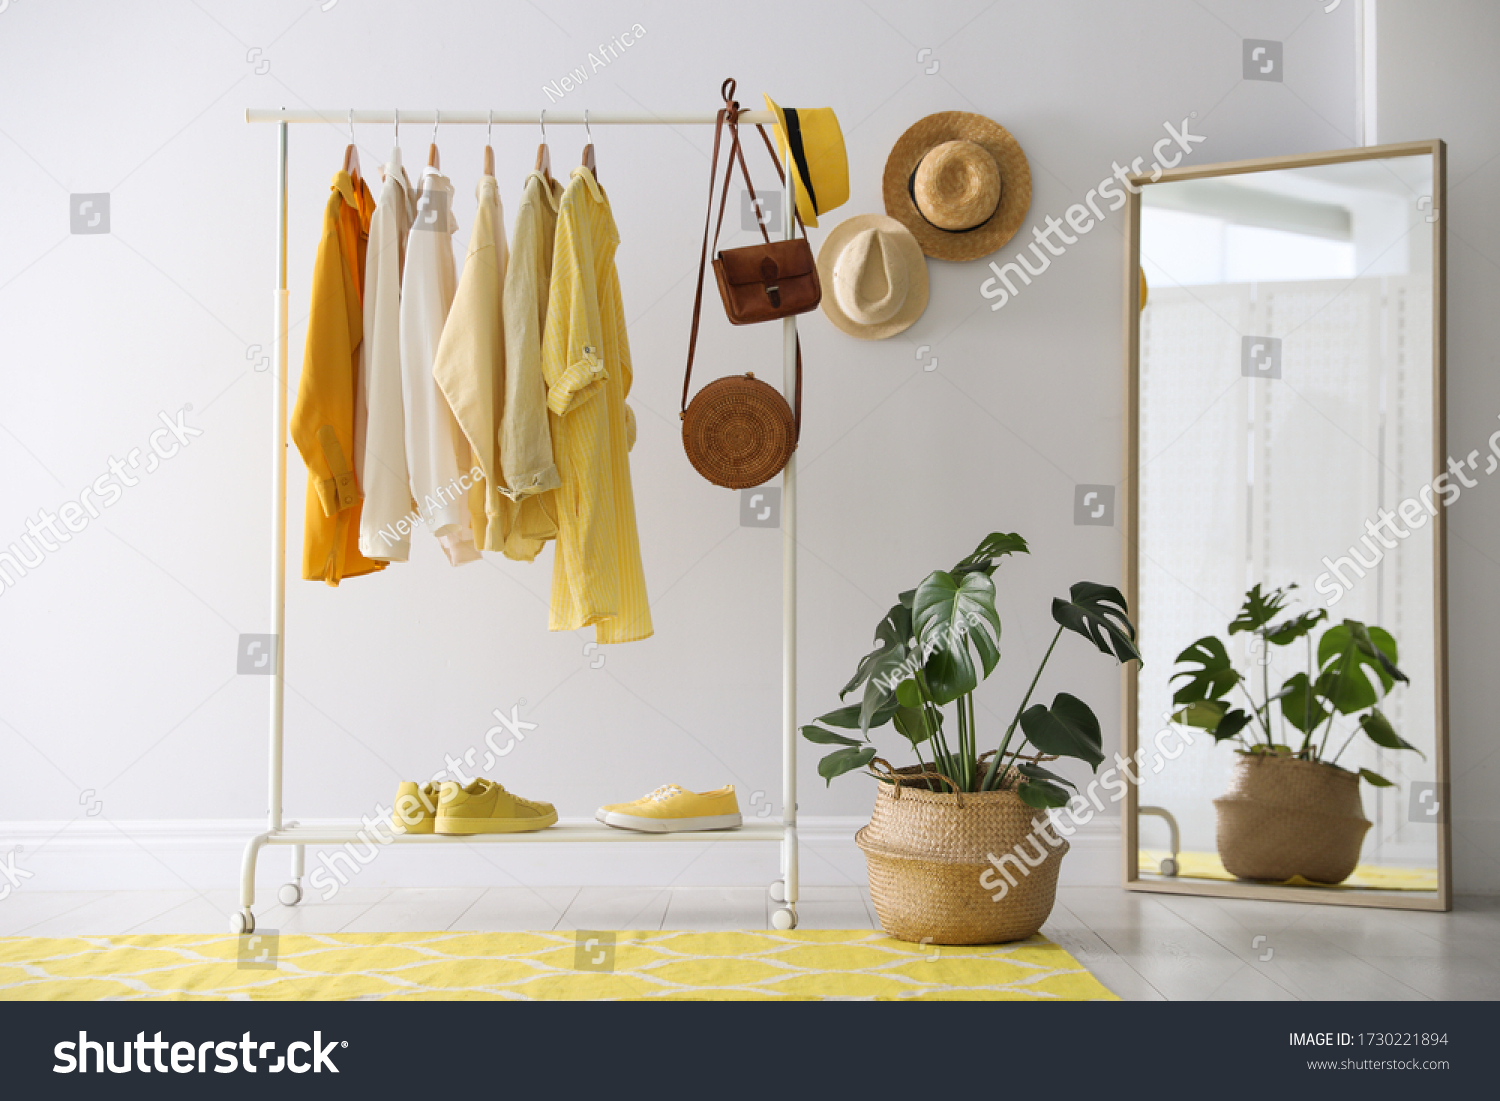 Rack with stylish women's clothes and mirror indoors. Interior design #1730221894